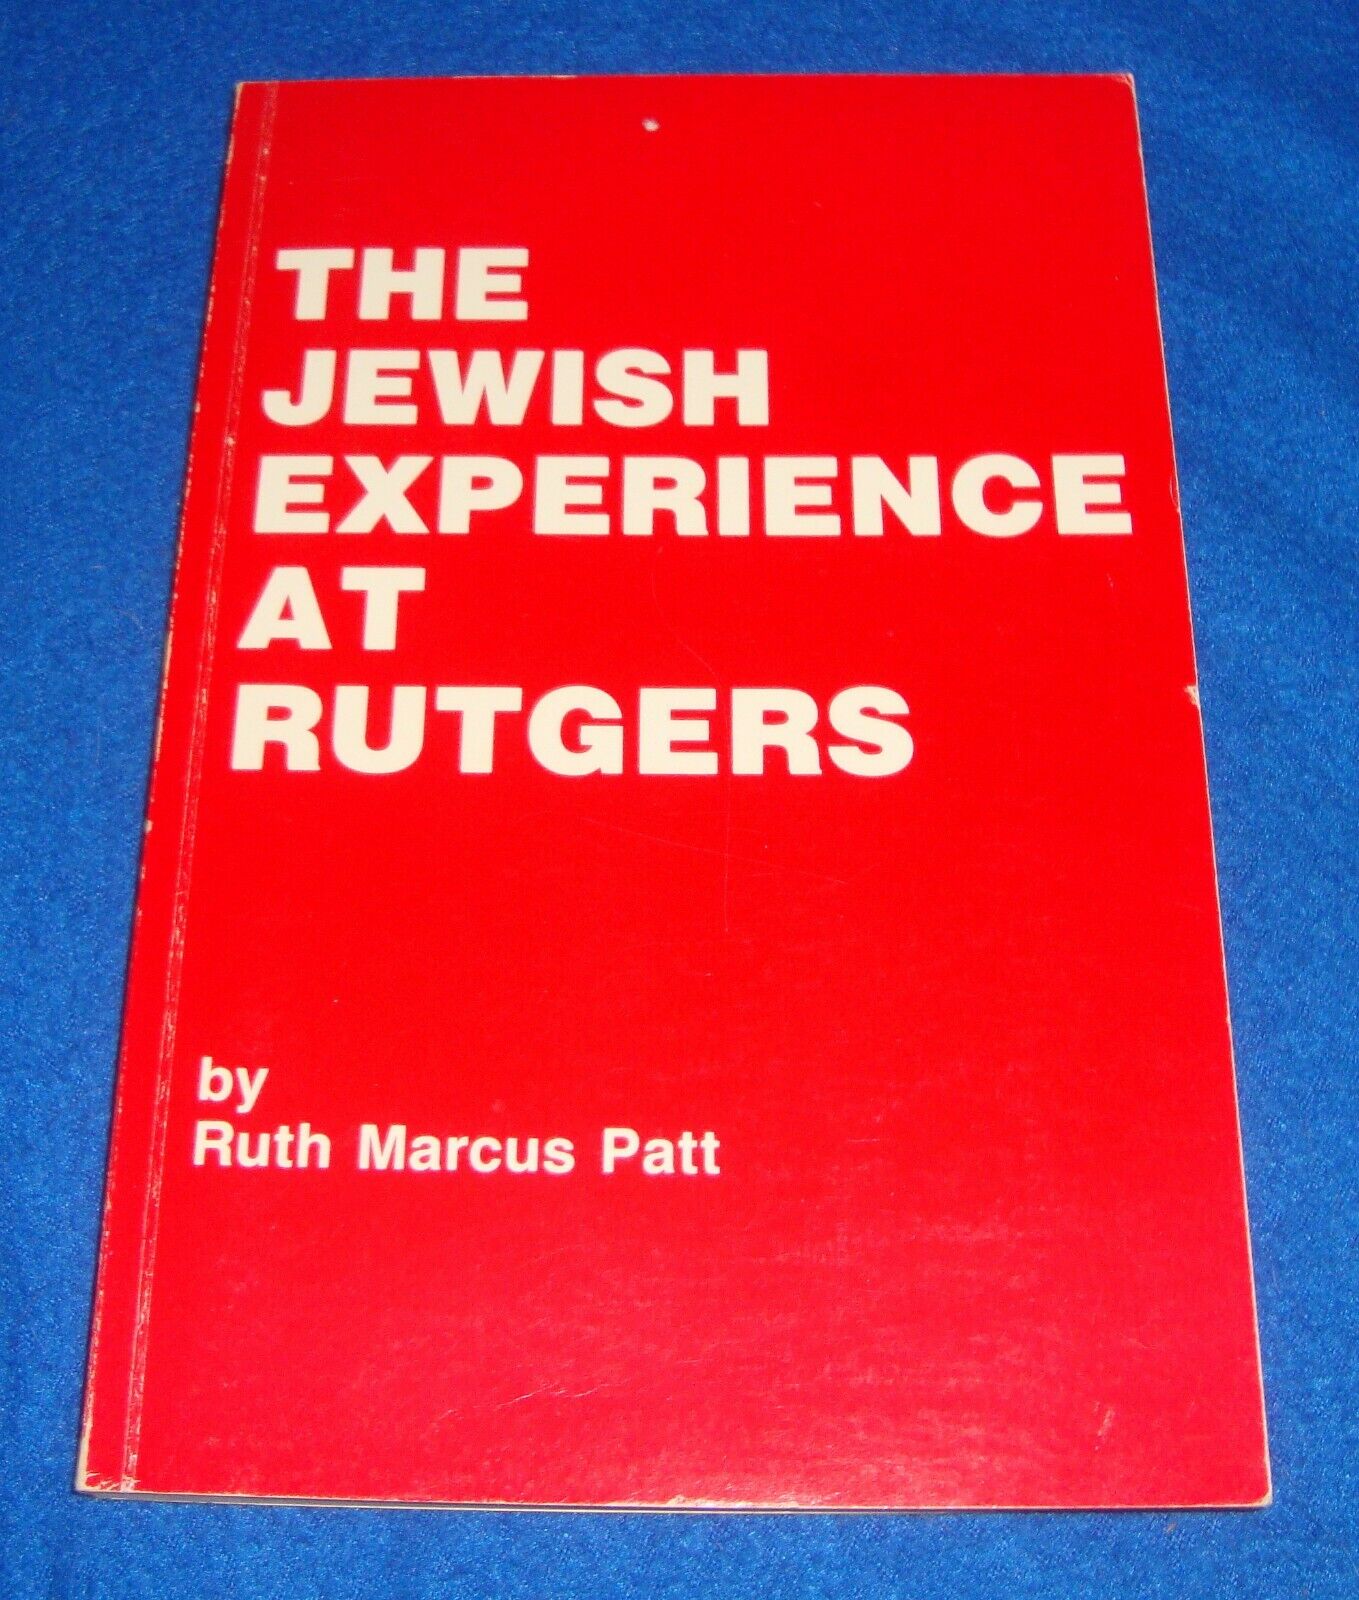 The Jewish Experience at Rutgers by Ruth Marcus Patt Signed